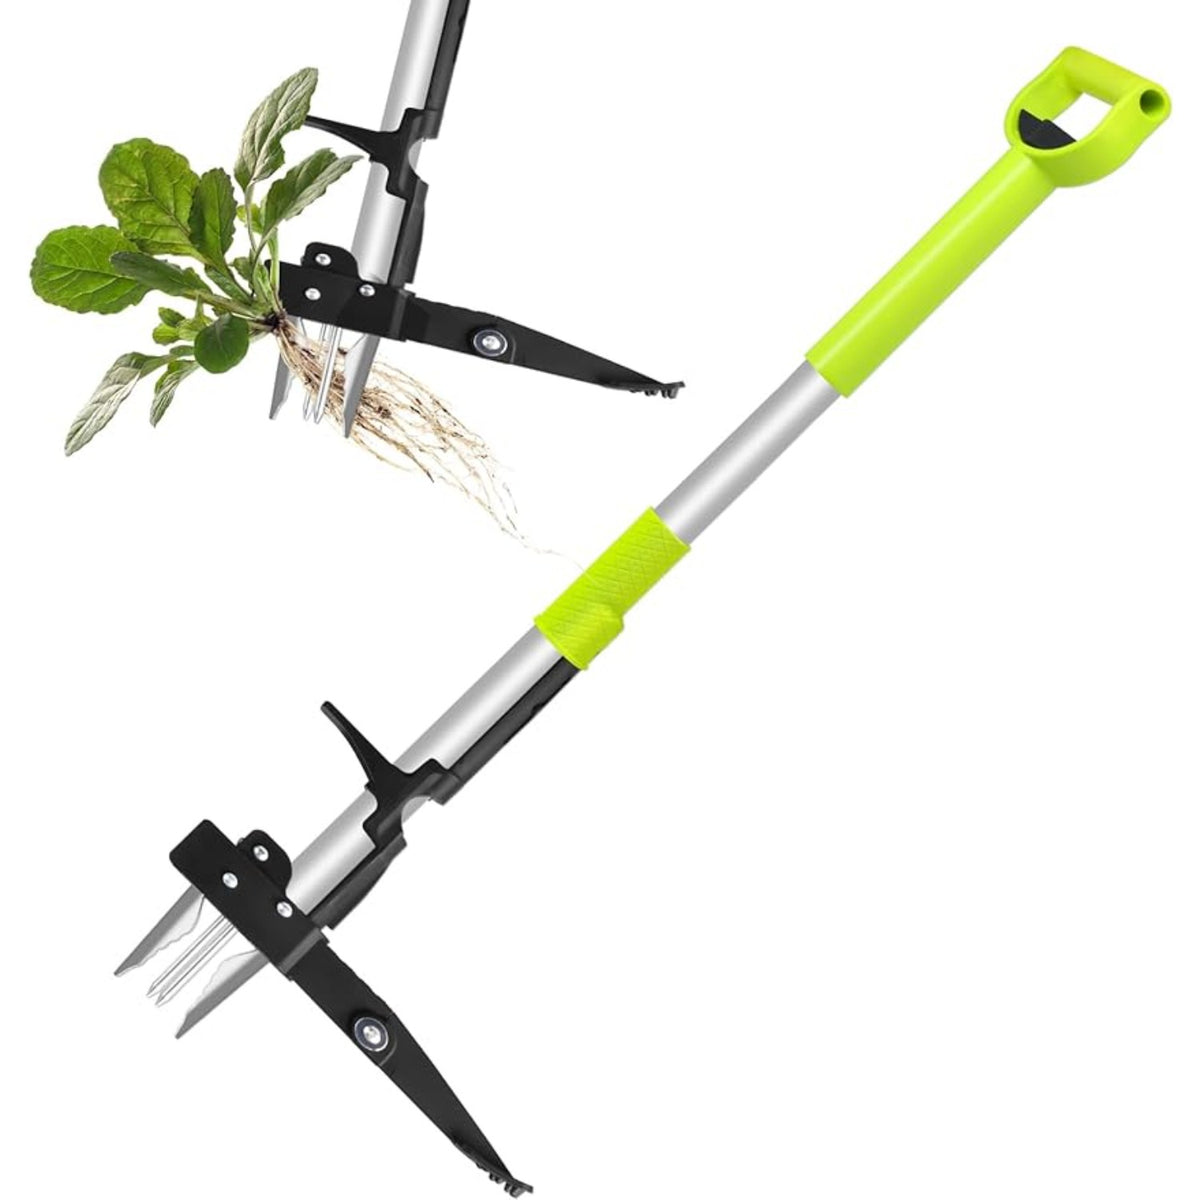 Stand Up Weeder Puller, 40-47inch Long Handle Weed Puller, Deluxe 4-Claws Weed Removal Weeding Tool - 2023 Upgraded Heavy Duty Steel Shaft